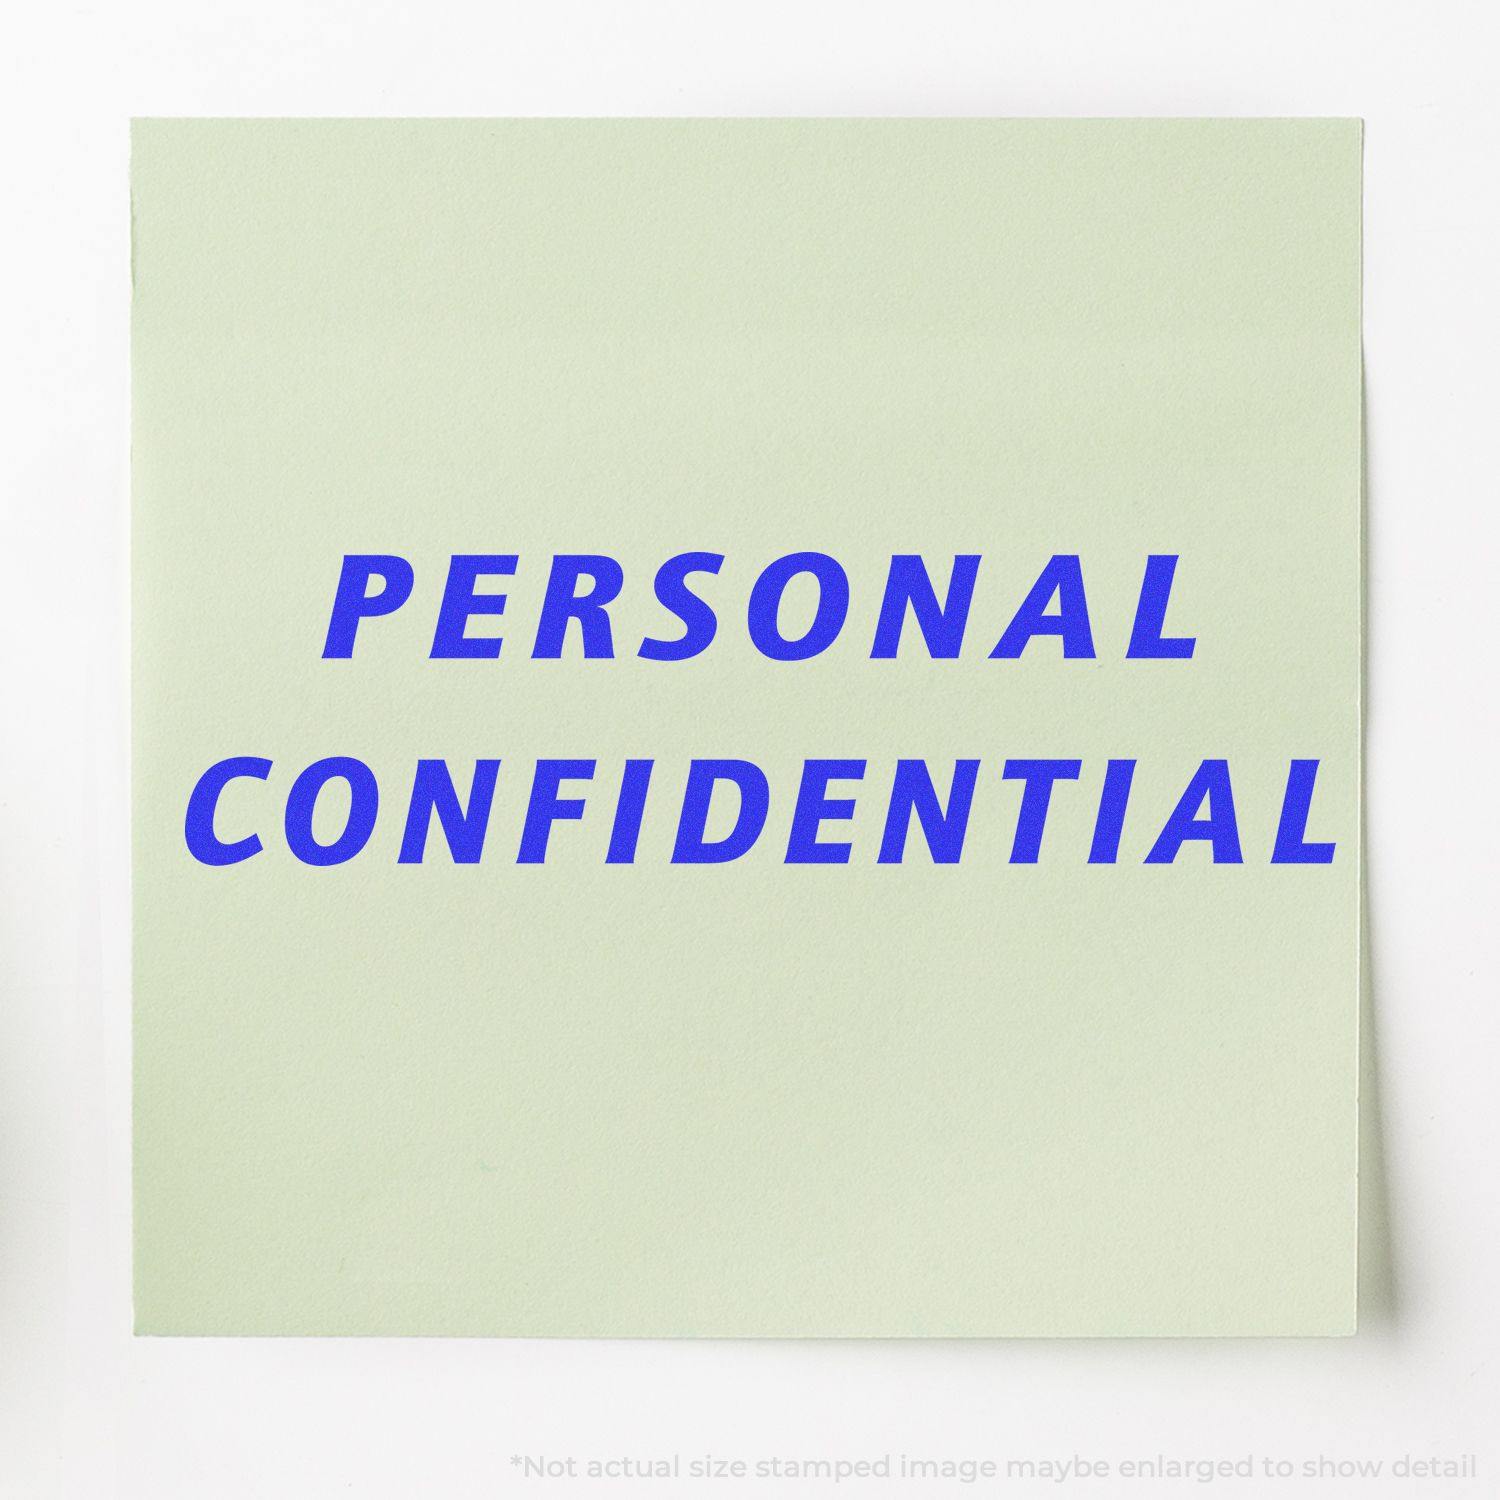 In Use Large Pre-Inked Italic Personal Confidential Stamp Image